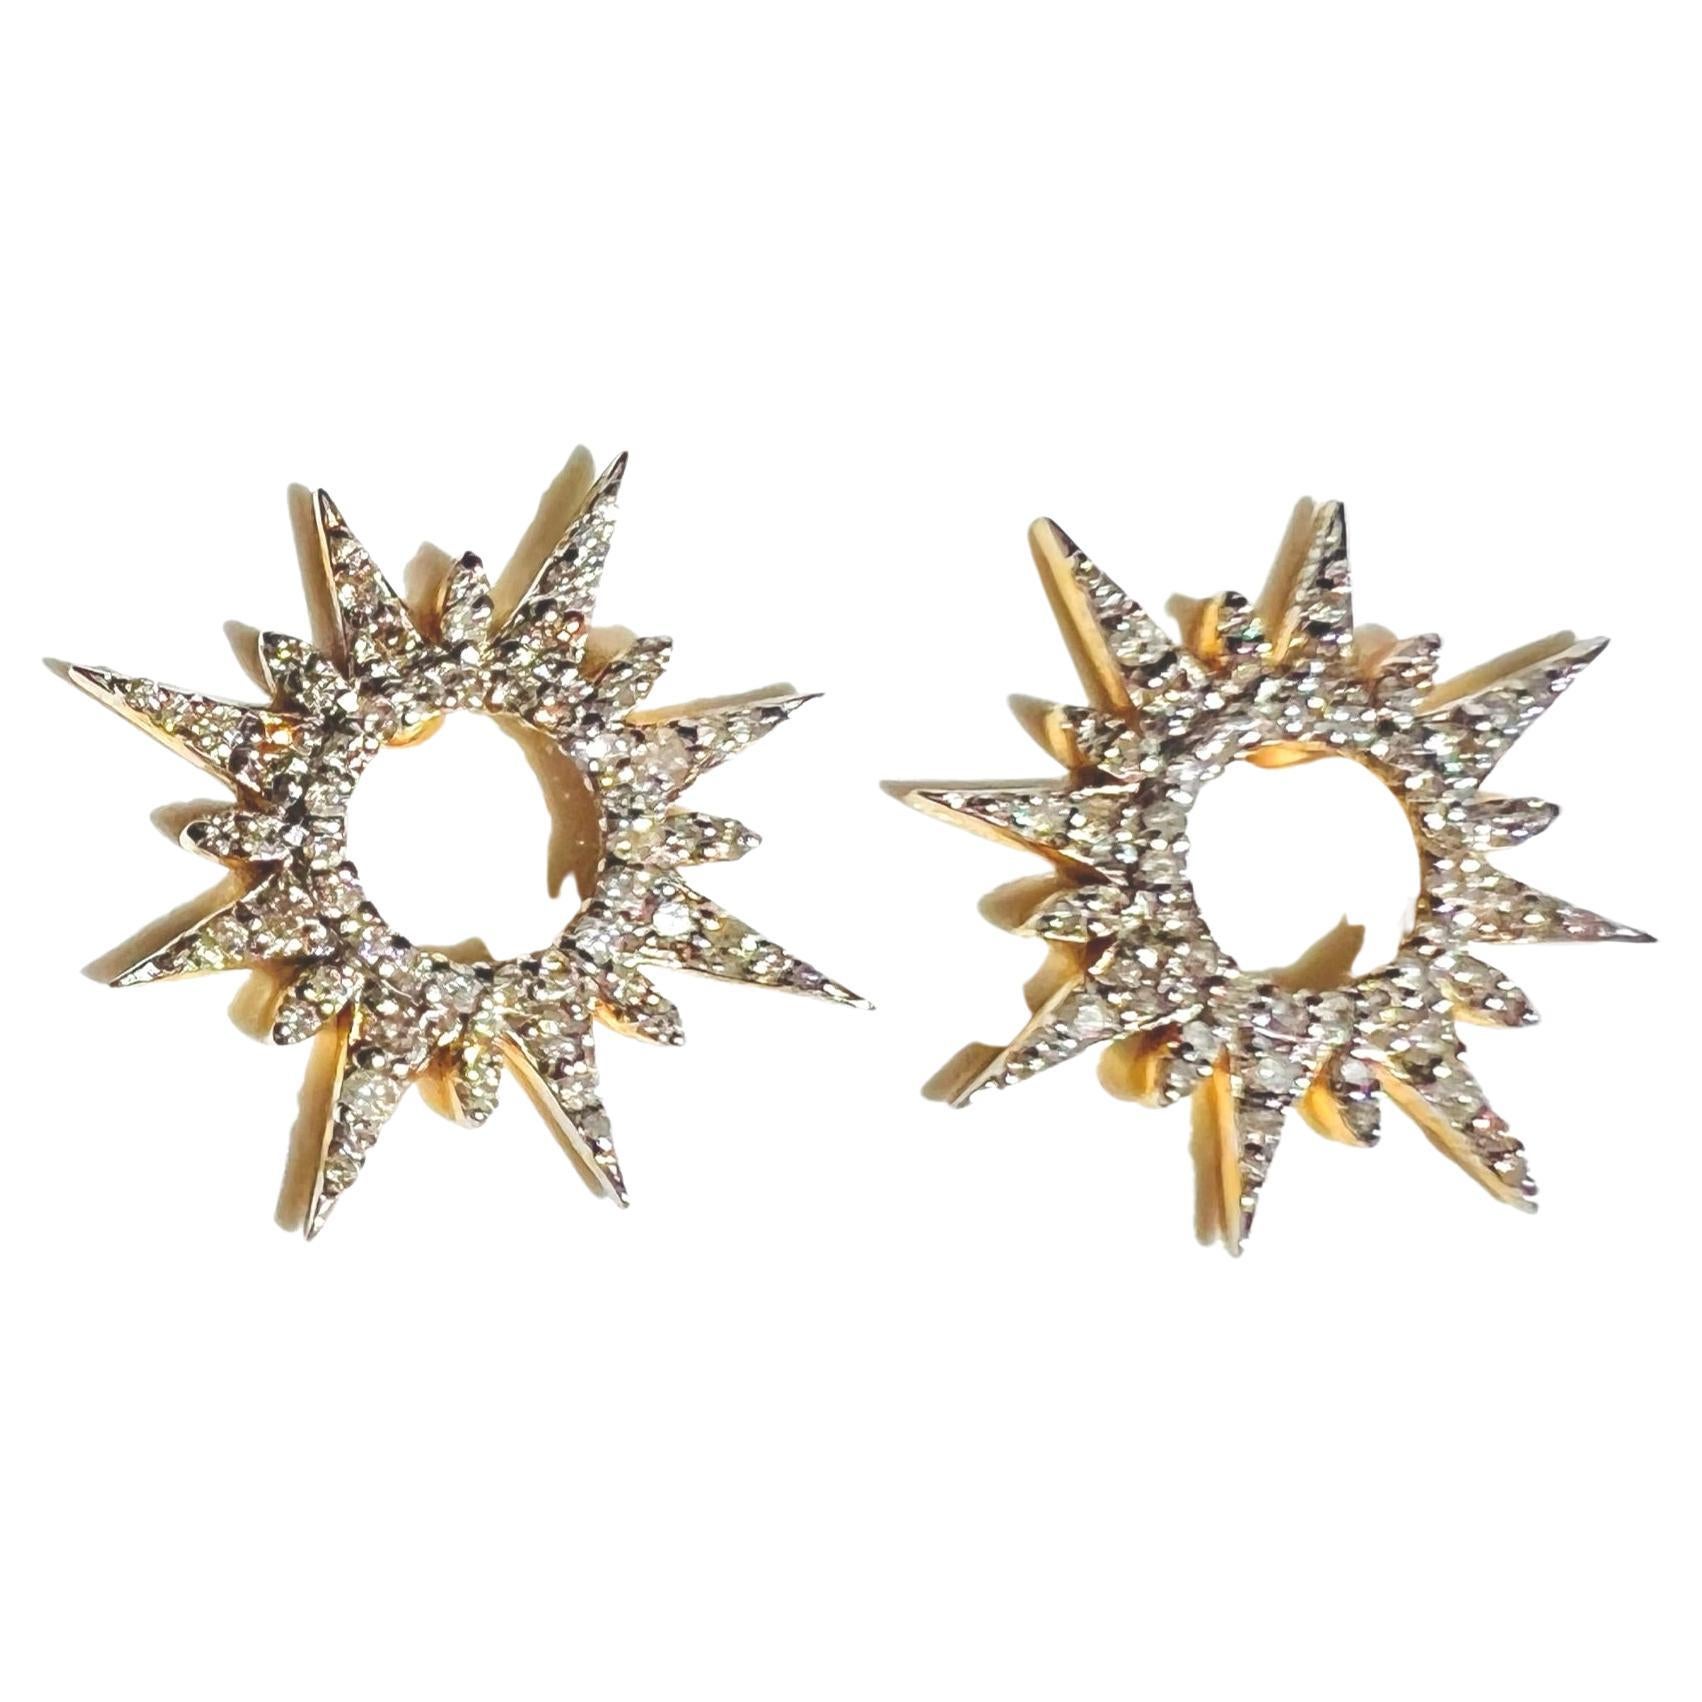 Sunburst & Pearl Earrings in Gold Filled or Titanium Ear Wires